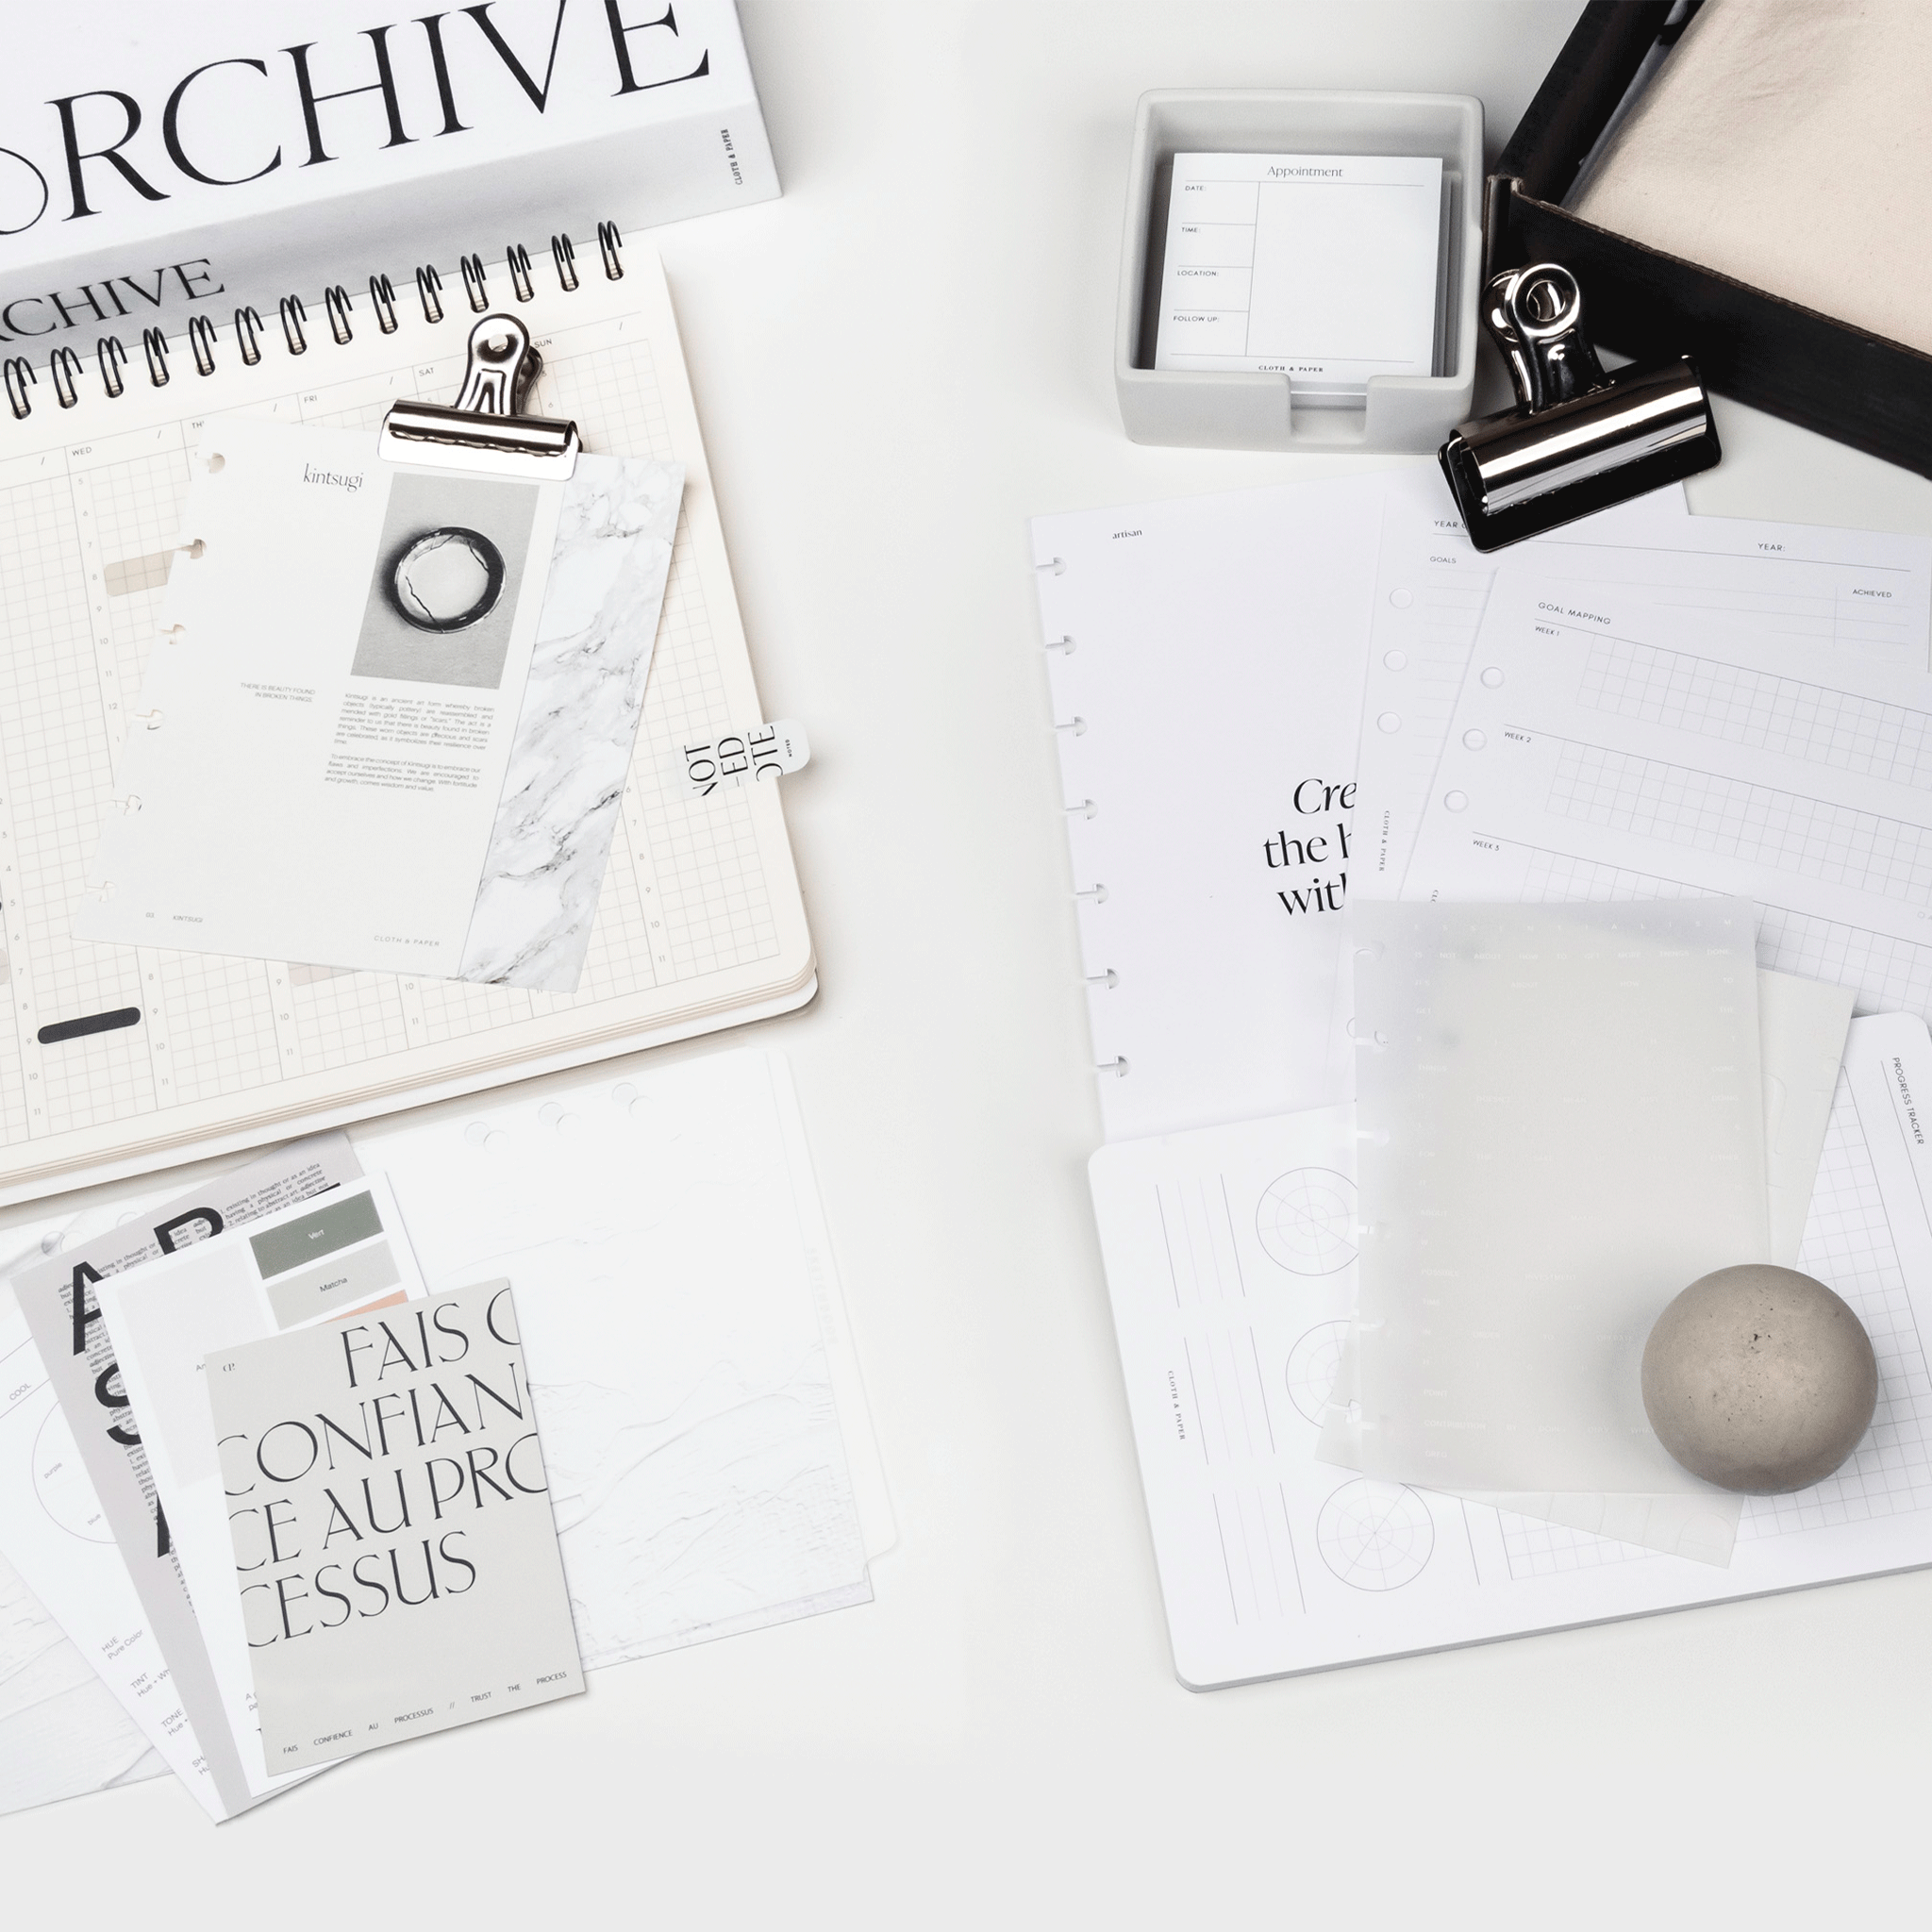 The Full Year Journal + Stationery Kit